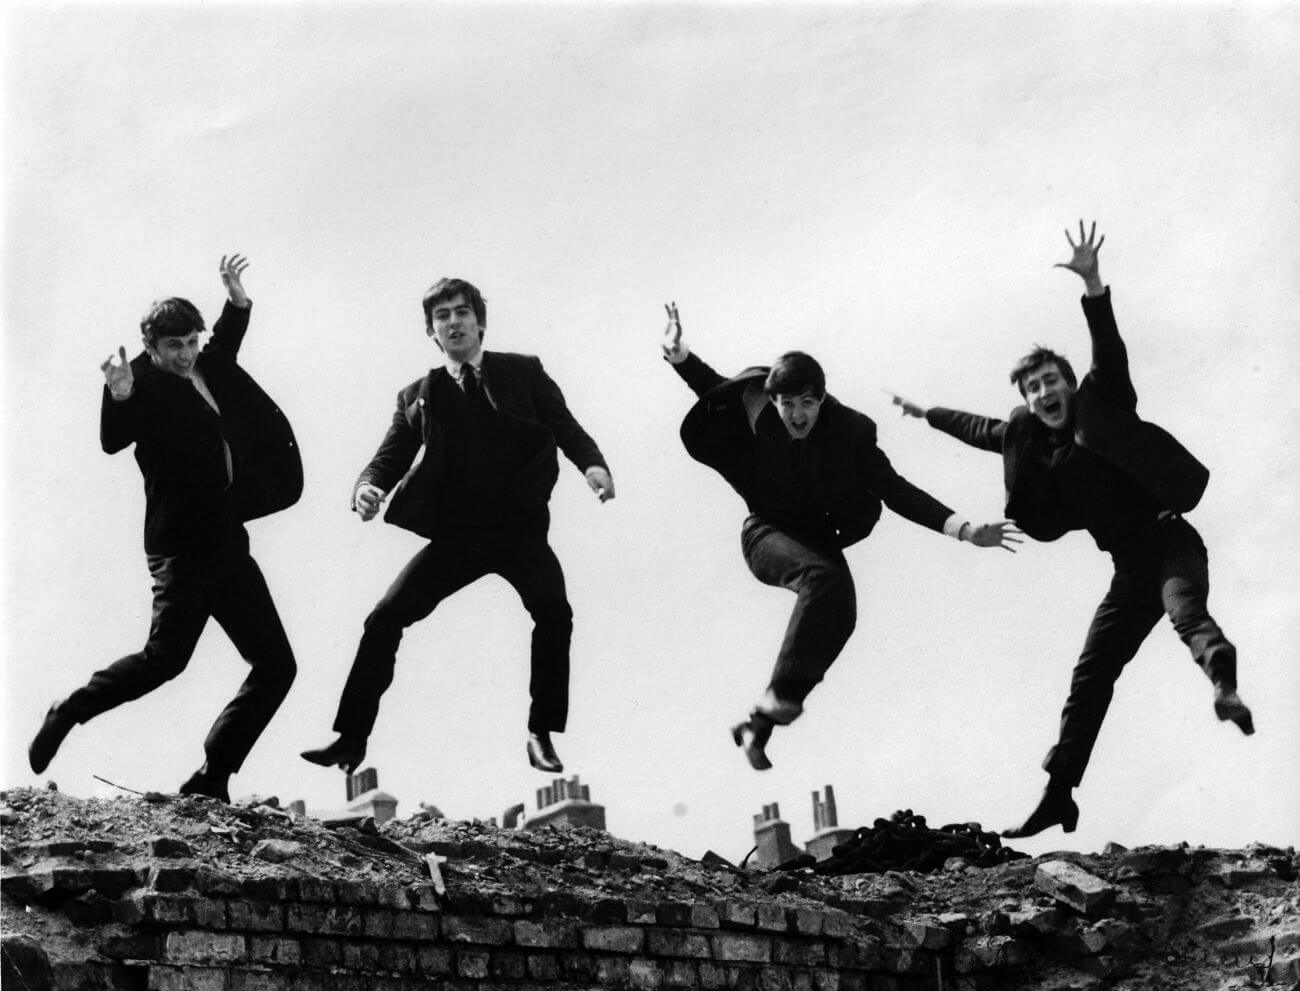 A black and white picture of Ringo Starr, George Harrison, Paul McCartney, and John Lennon of The Beatles jumping off a brick wall.